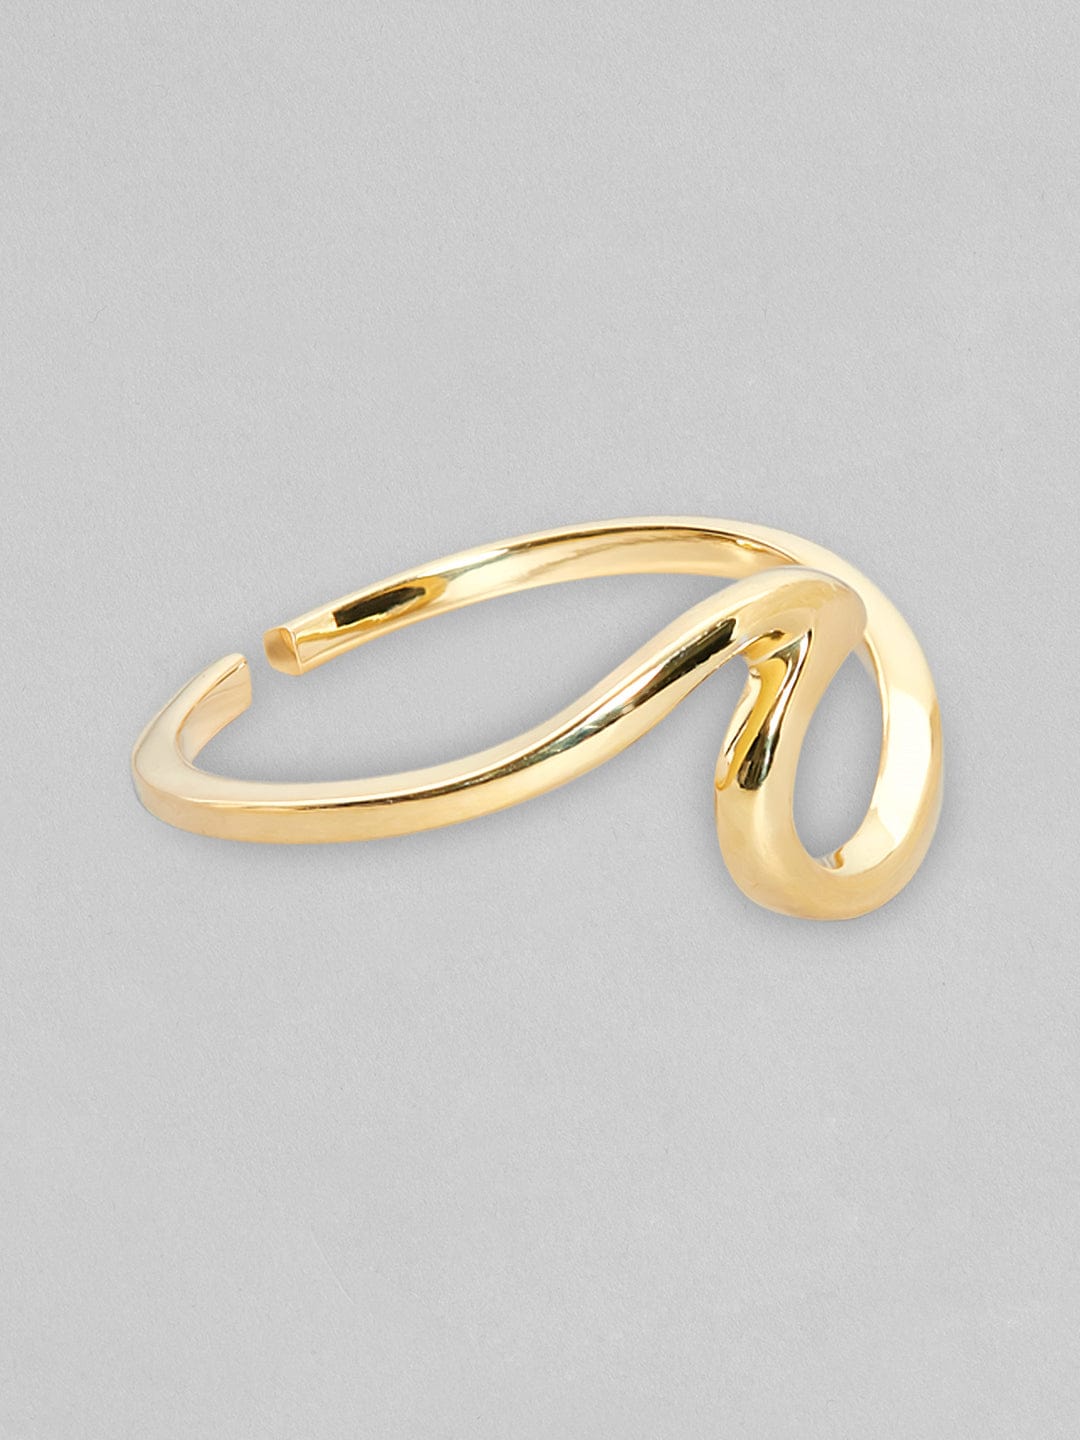 The Minimalist Ring - Gold Plated Rings